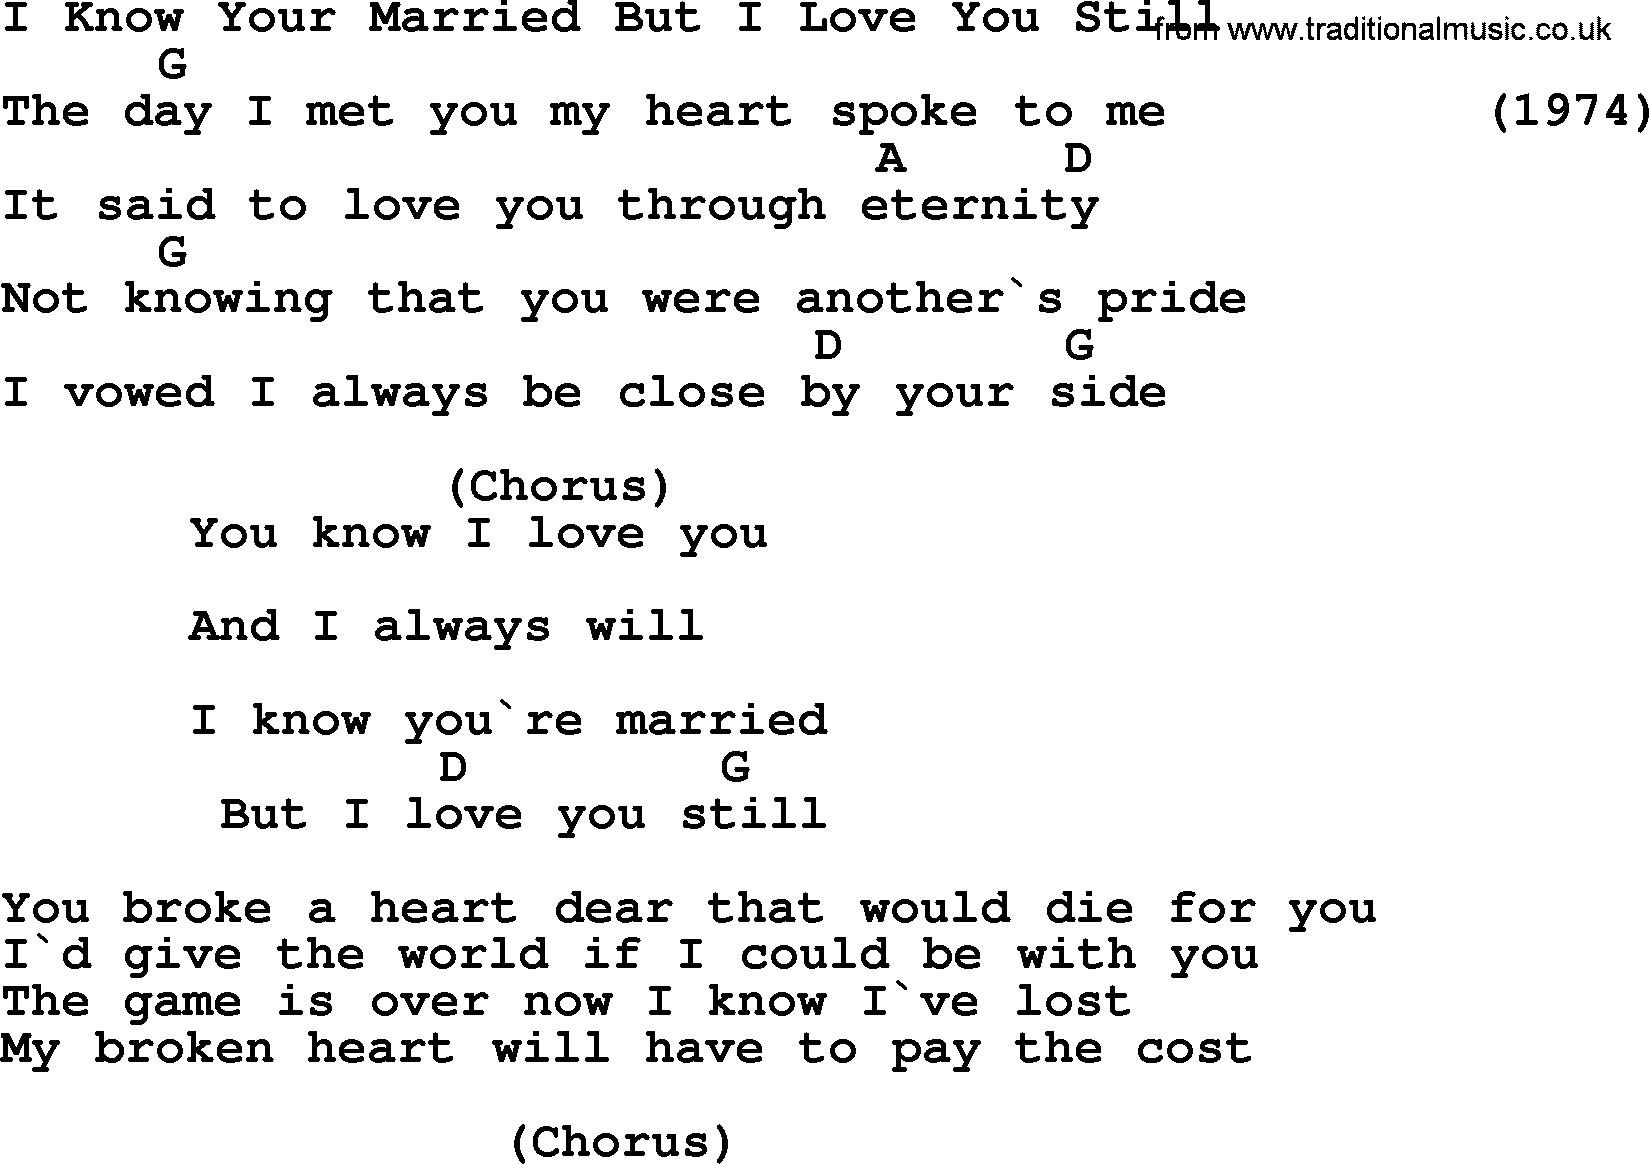 Bluegrass song: I Know Your Married But I Love You Still, lyrics and chords